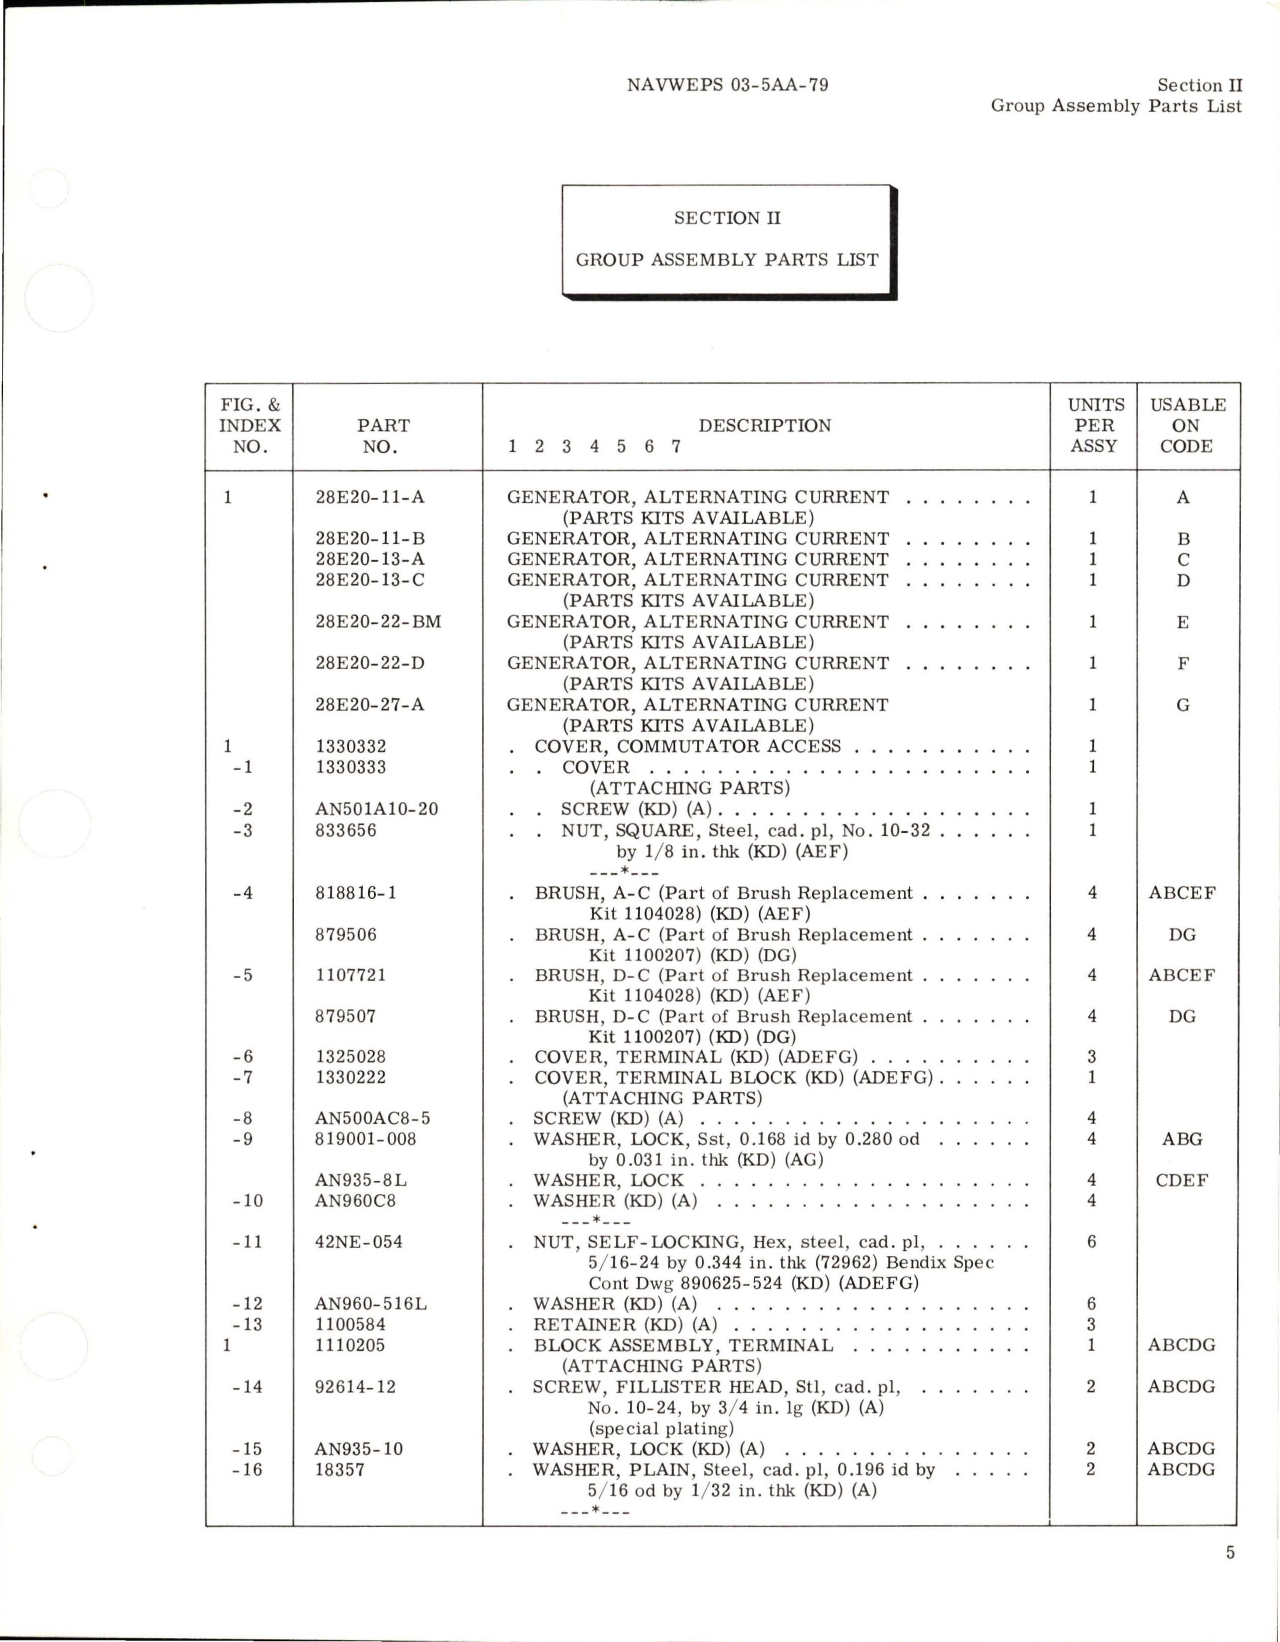 Sample page 7 from AirCorps Library document: Illustrated Parts Breakdown for Alternating Current Generator